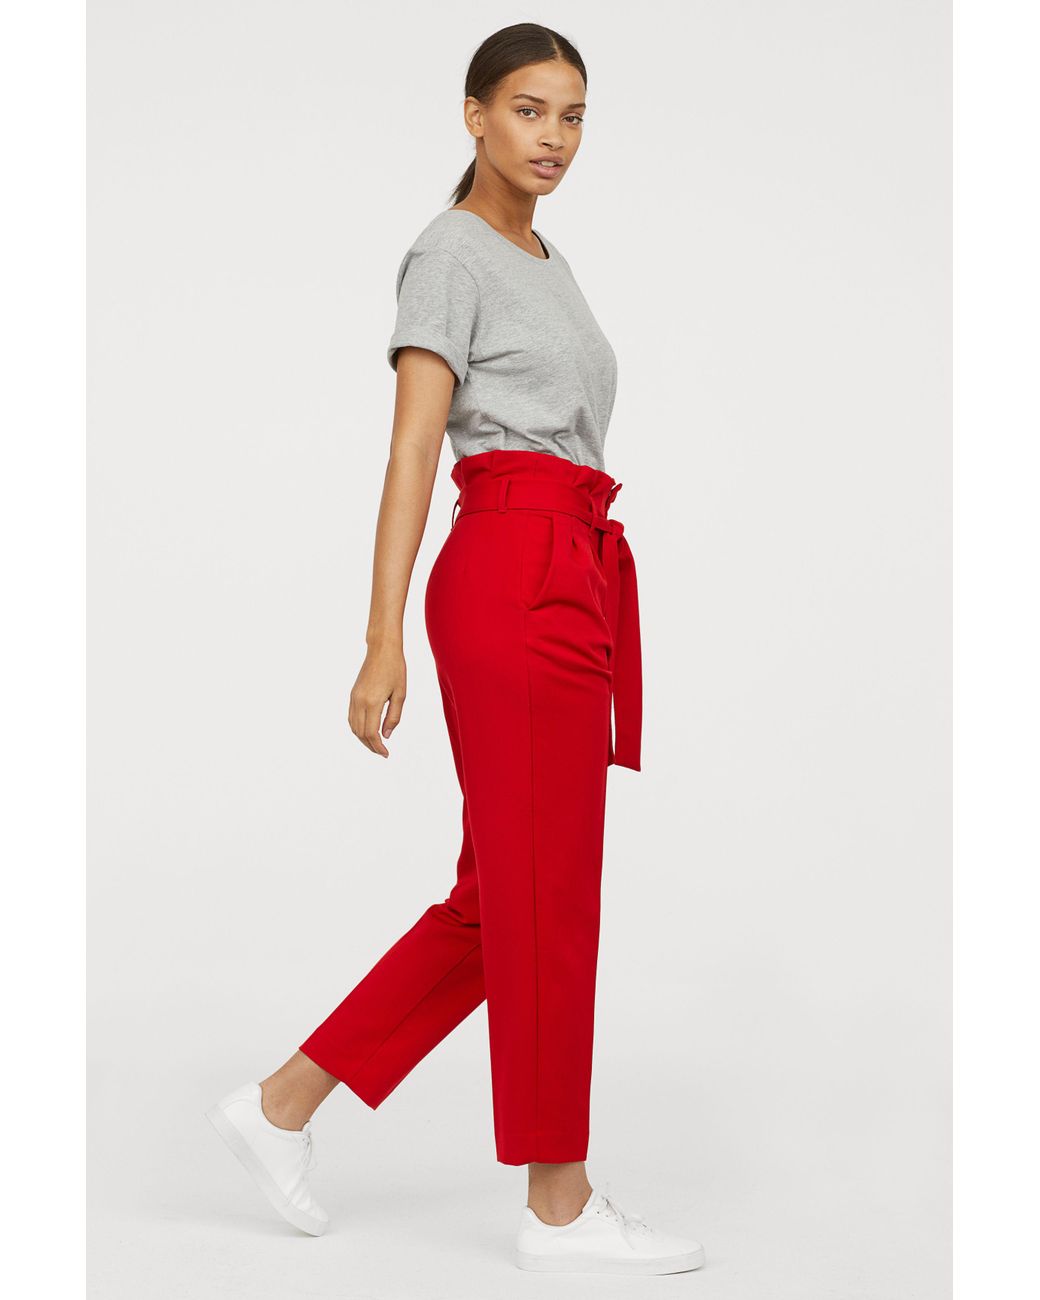 ASOS DESIGN super skinny suit pants in bright red in four way stretch  ASOS